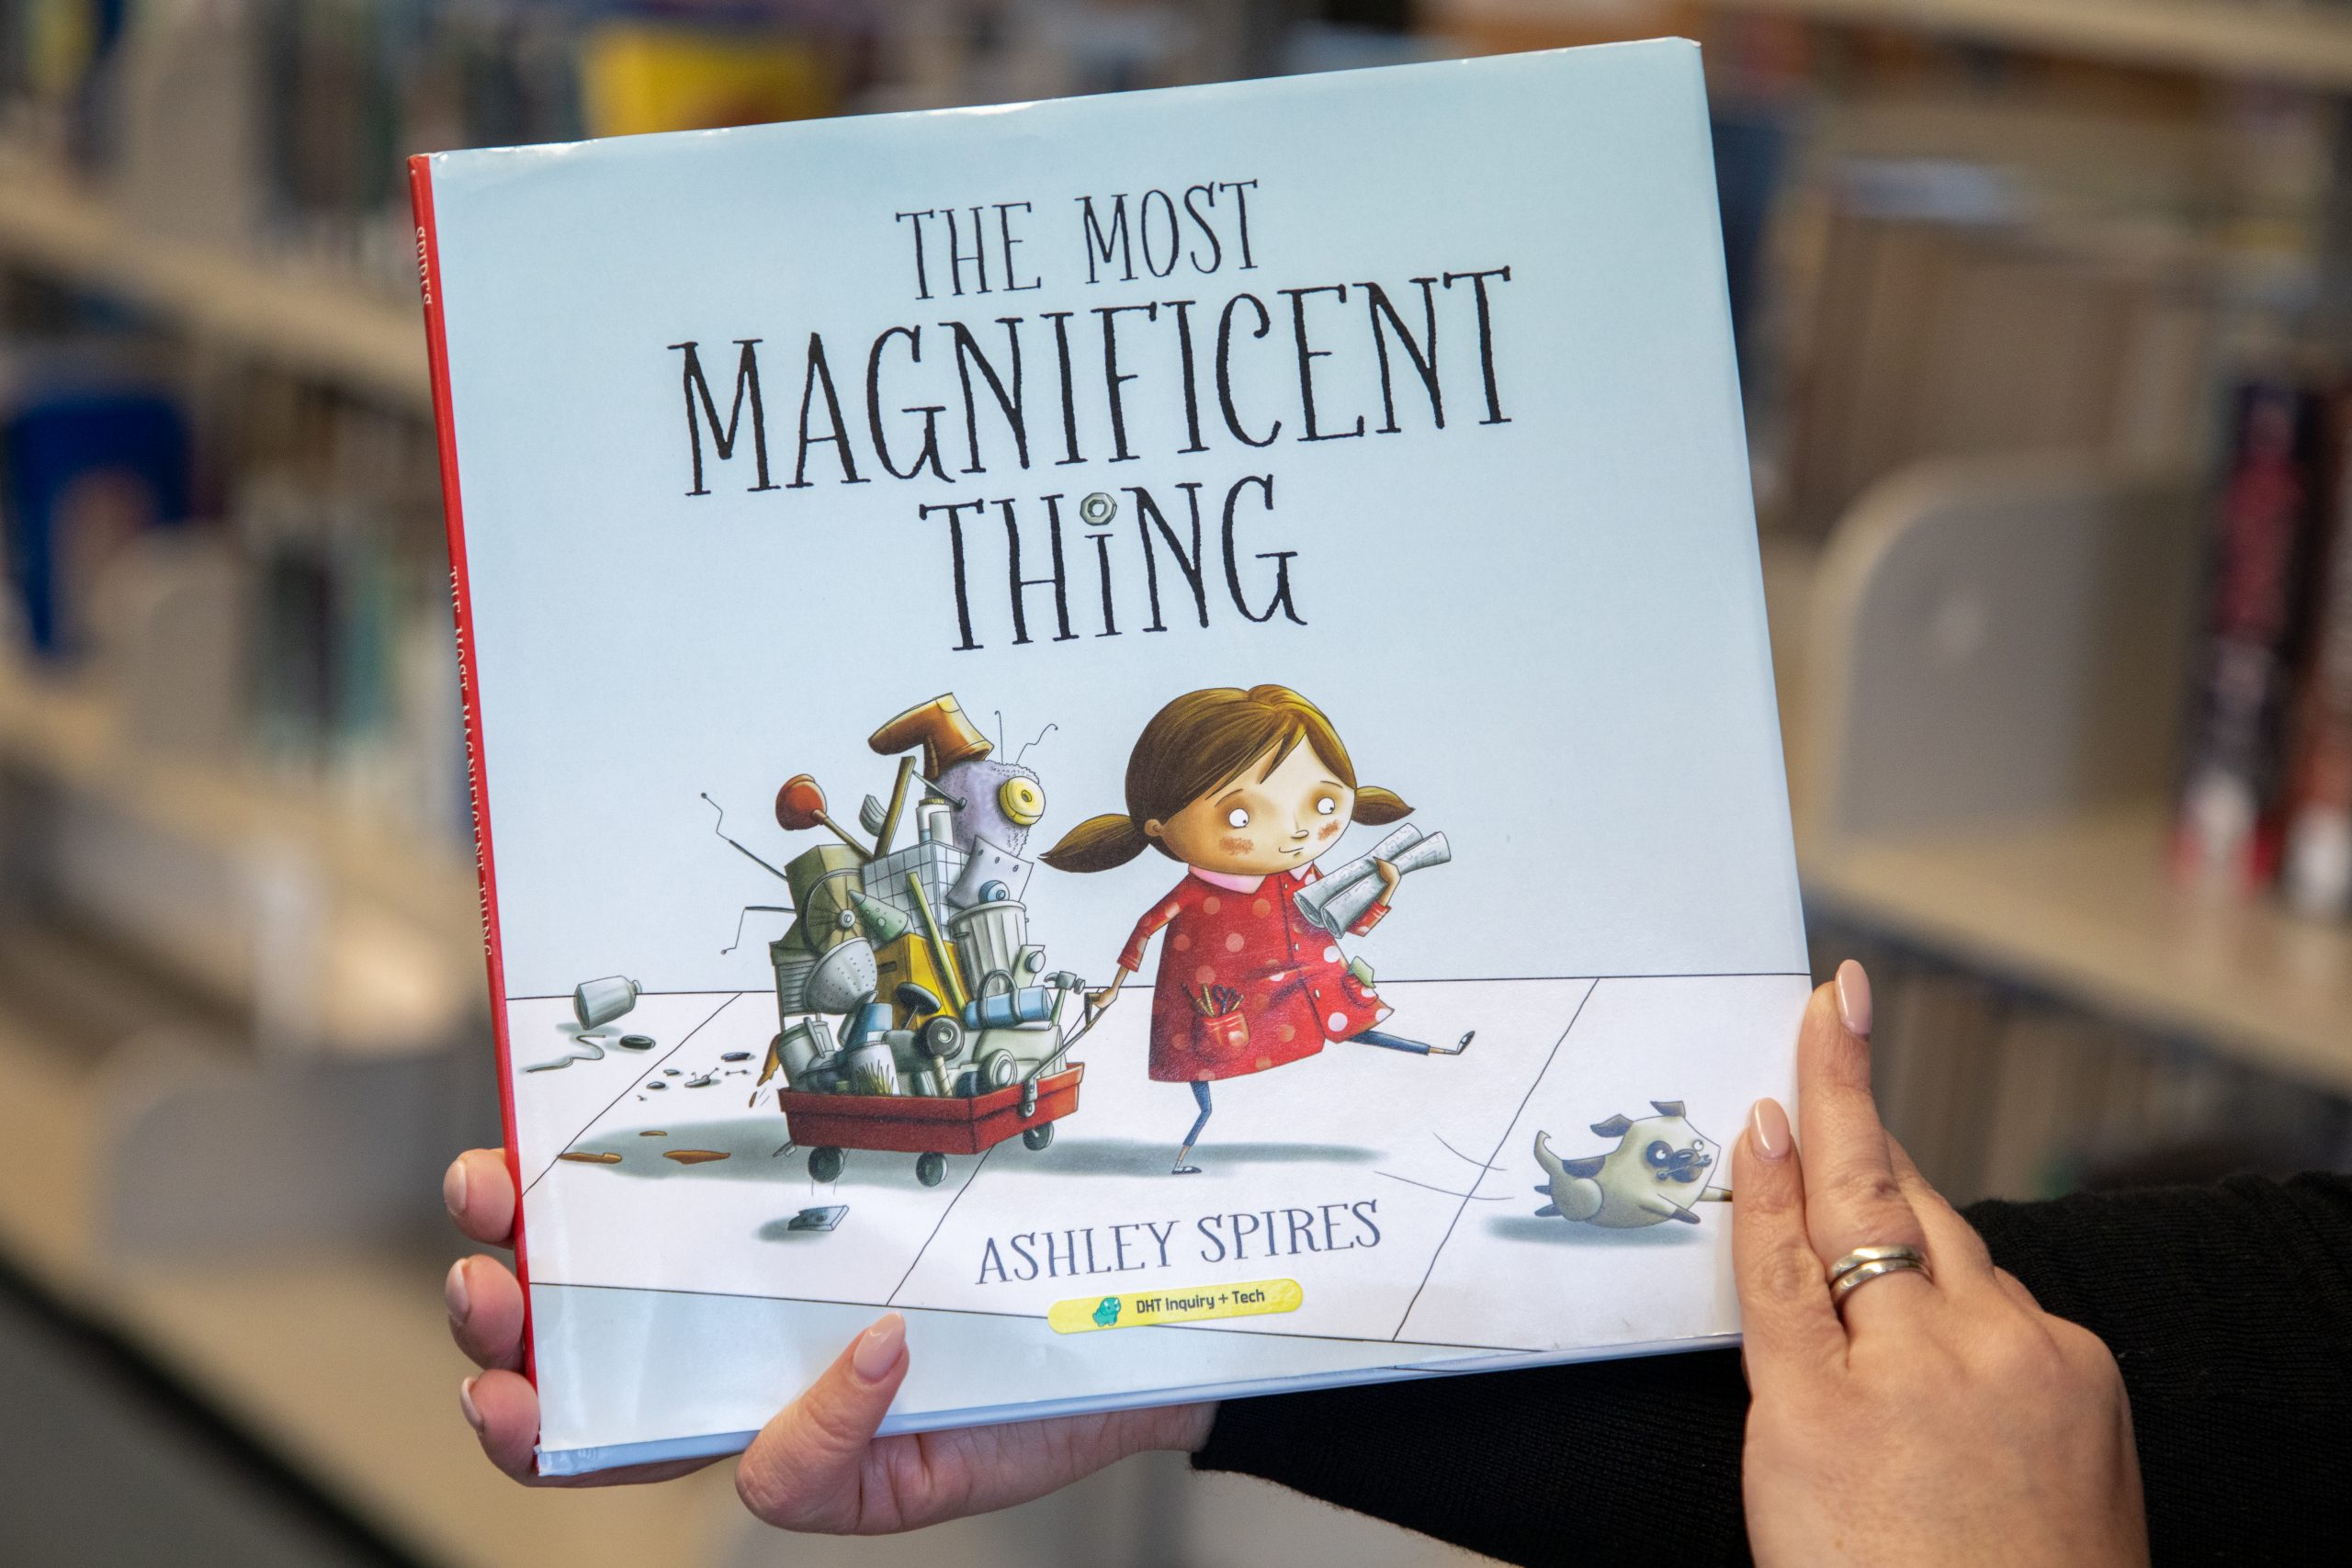 Book cover of "The Most Magnificent Thing" by Ashley Spires. A girl pulls a wagon holding various metal parts.